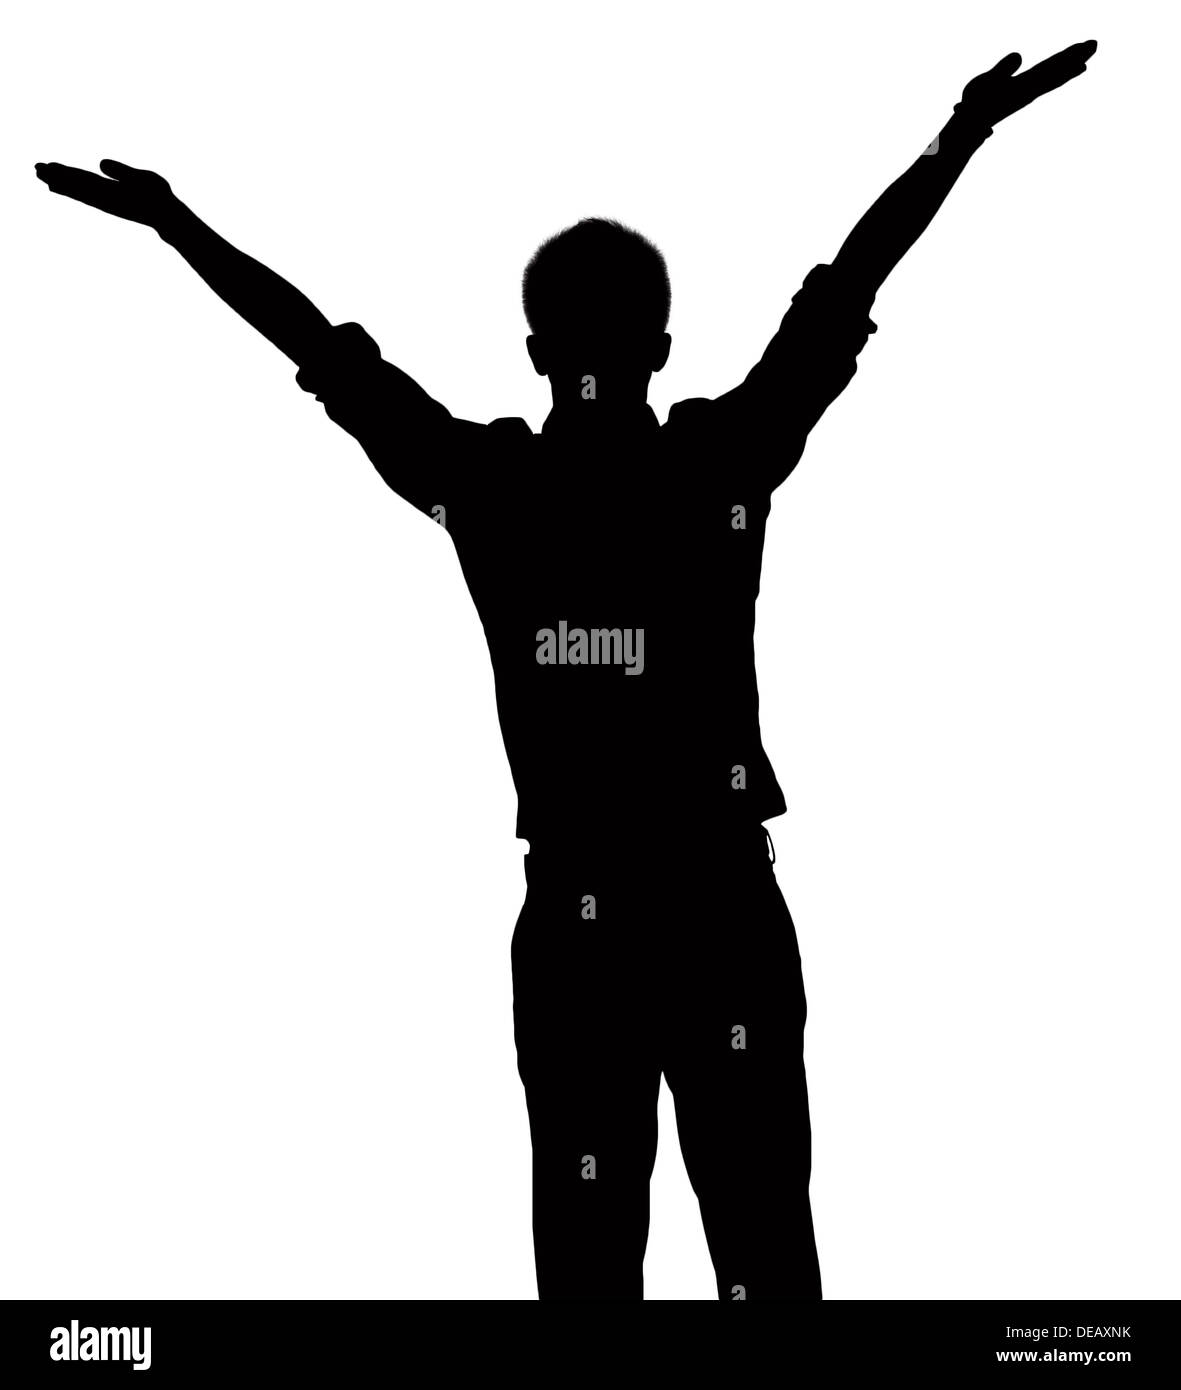 Silhouette of woman with arms raised. Banque D'Images